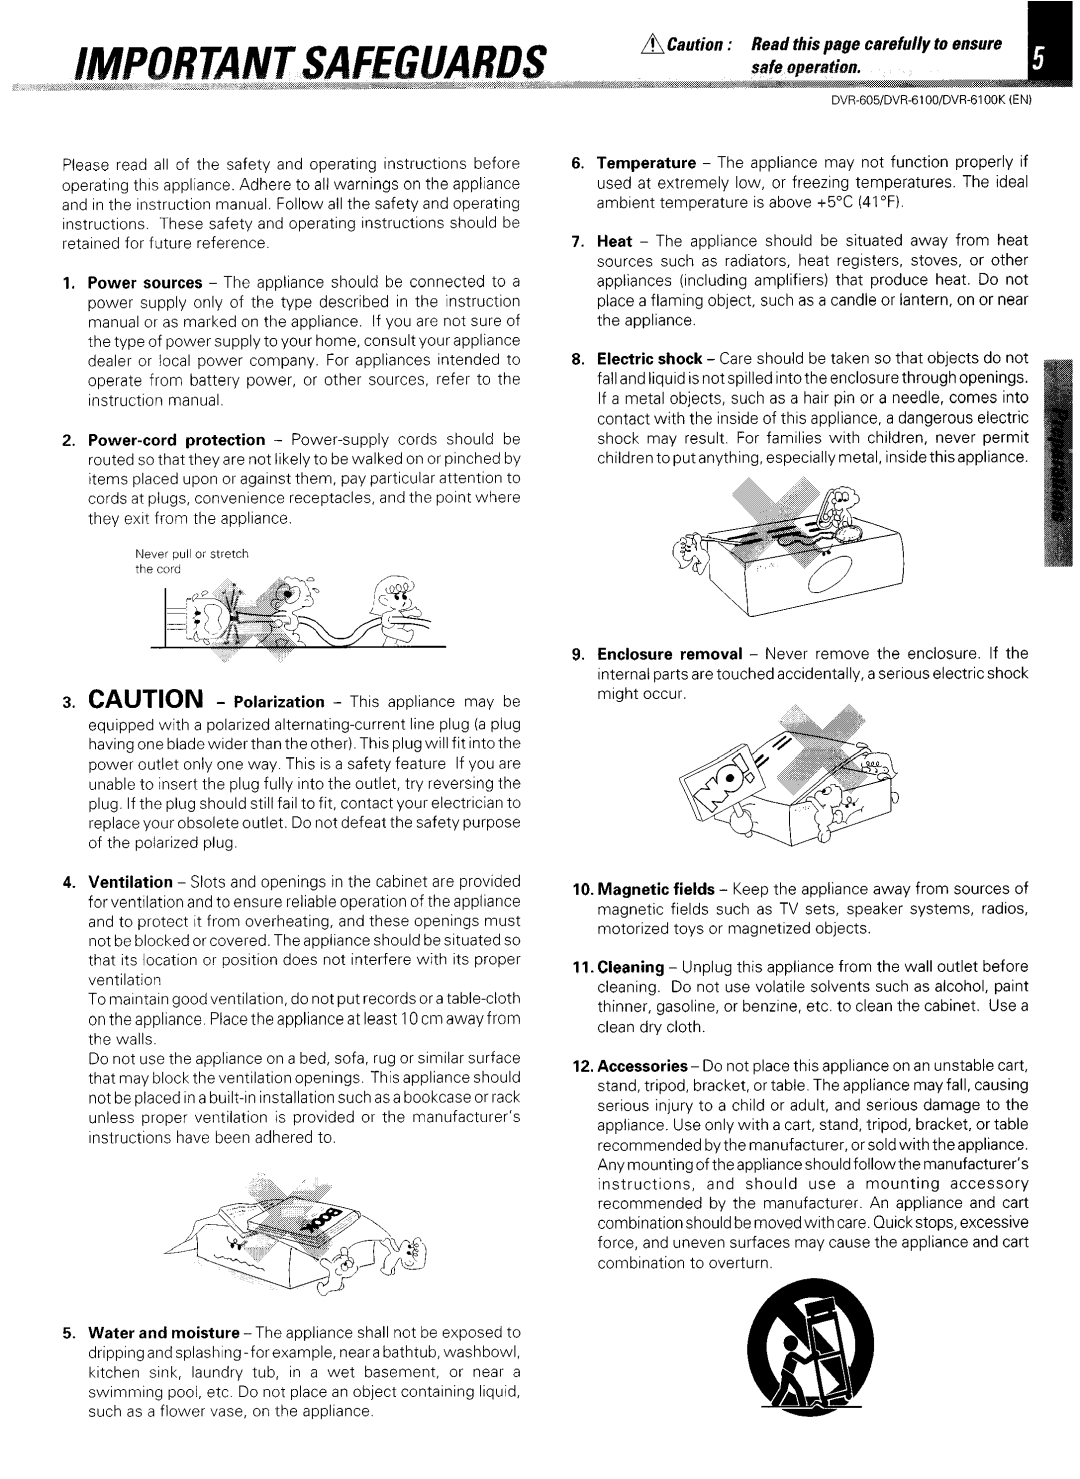 Kenwood DVR-6100K instruction manual A Caution Read this page carefully to ensure 